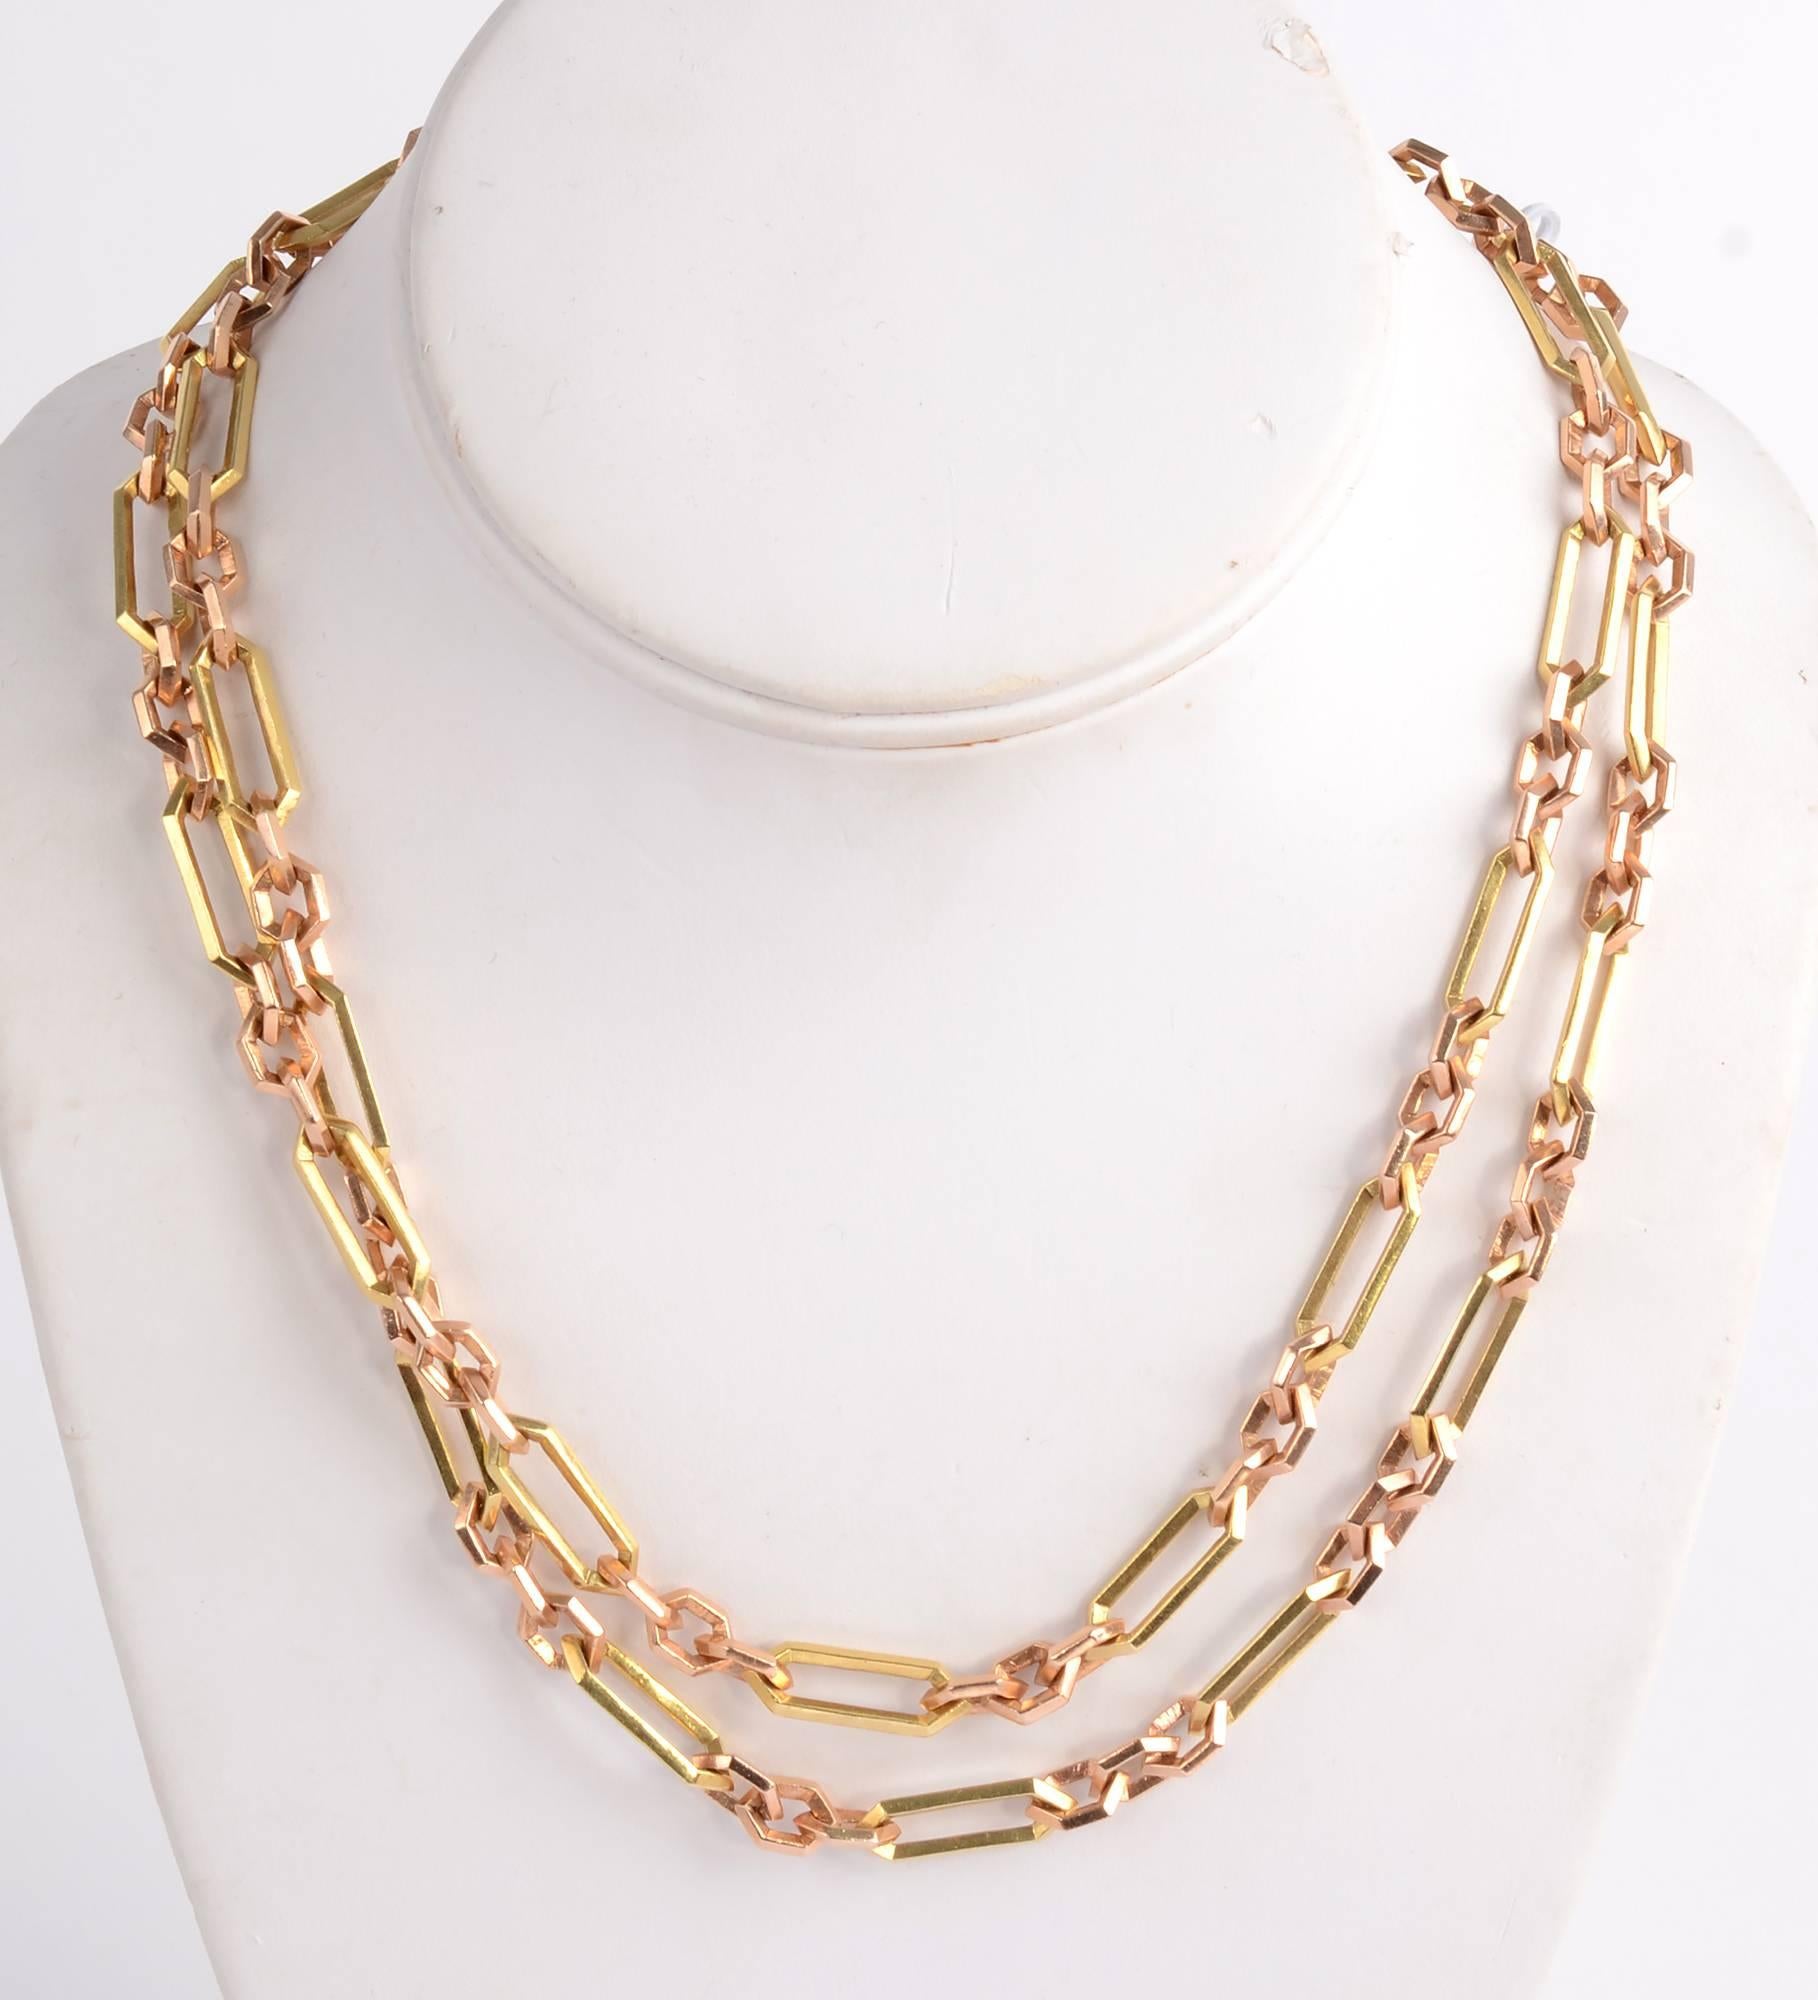 Retro endless chain necklace of pink and yellow gold.  Groups of three small links of pink gold alternate with longer yellow ones of 18 karat. The edges of the links are flat making for many planes and creating a nice reflective quality. The